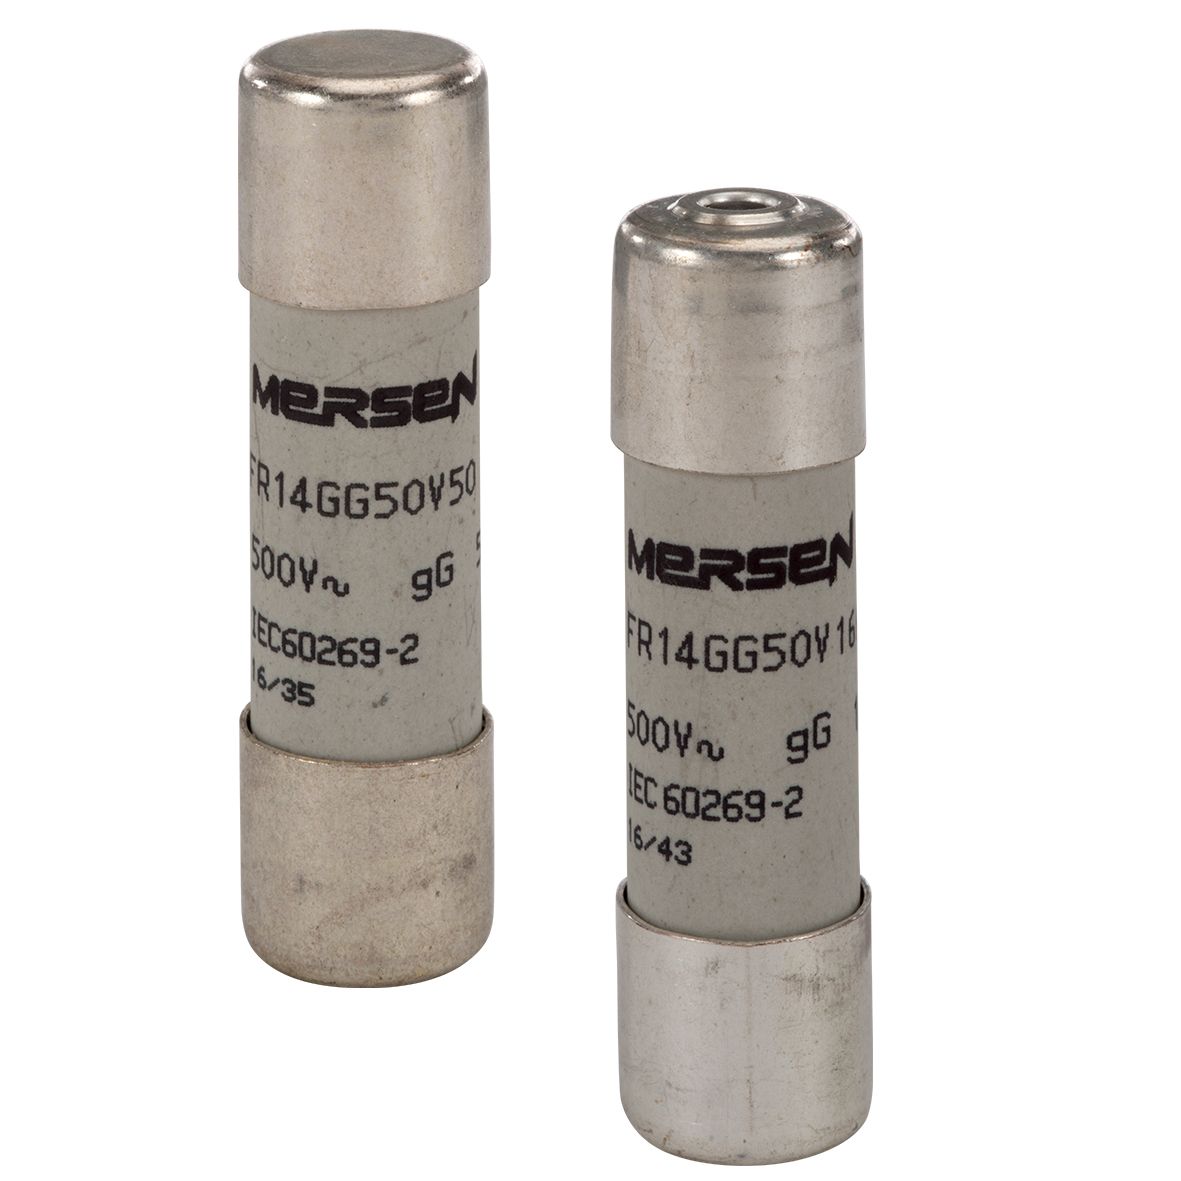 Z218200 - Cylindrical fuse-link gG 500VAC 14.3x51, 16A with striker